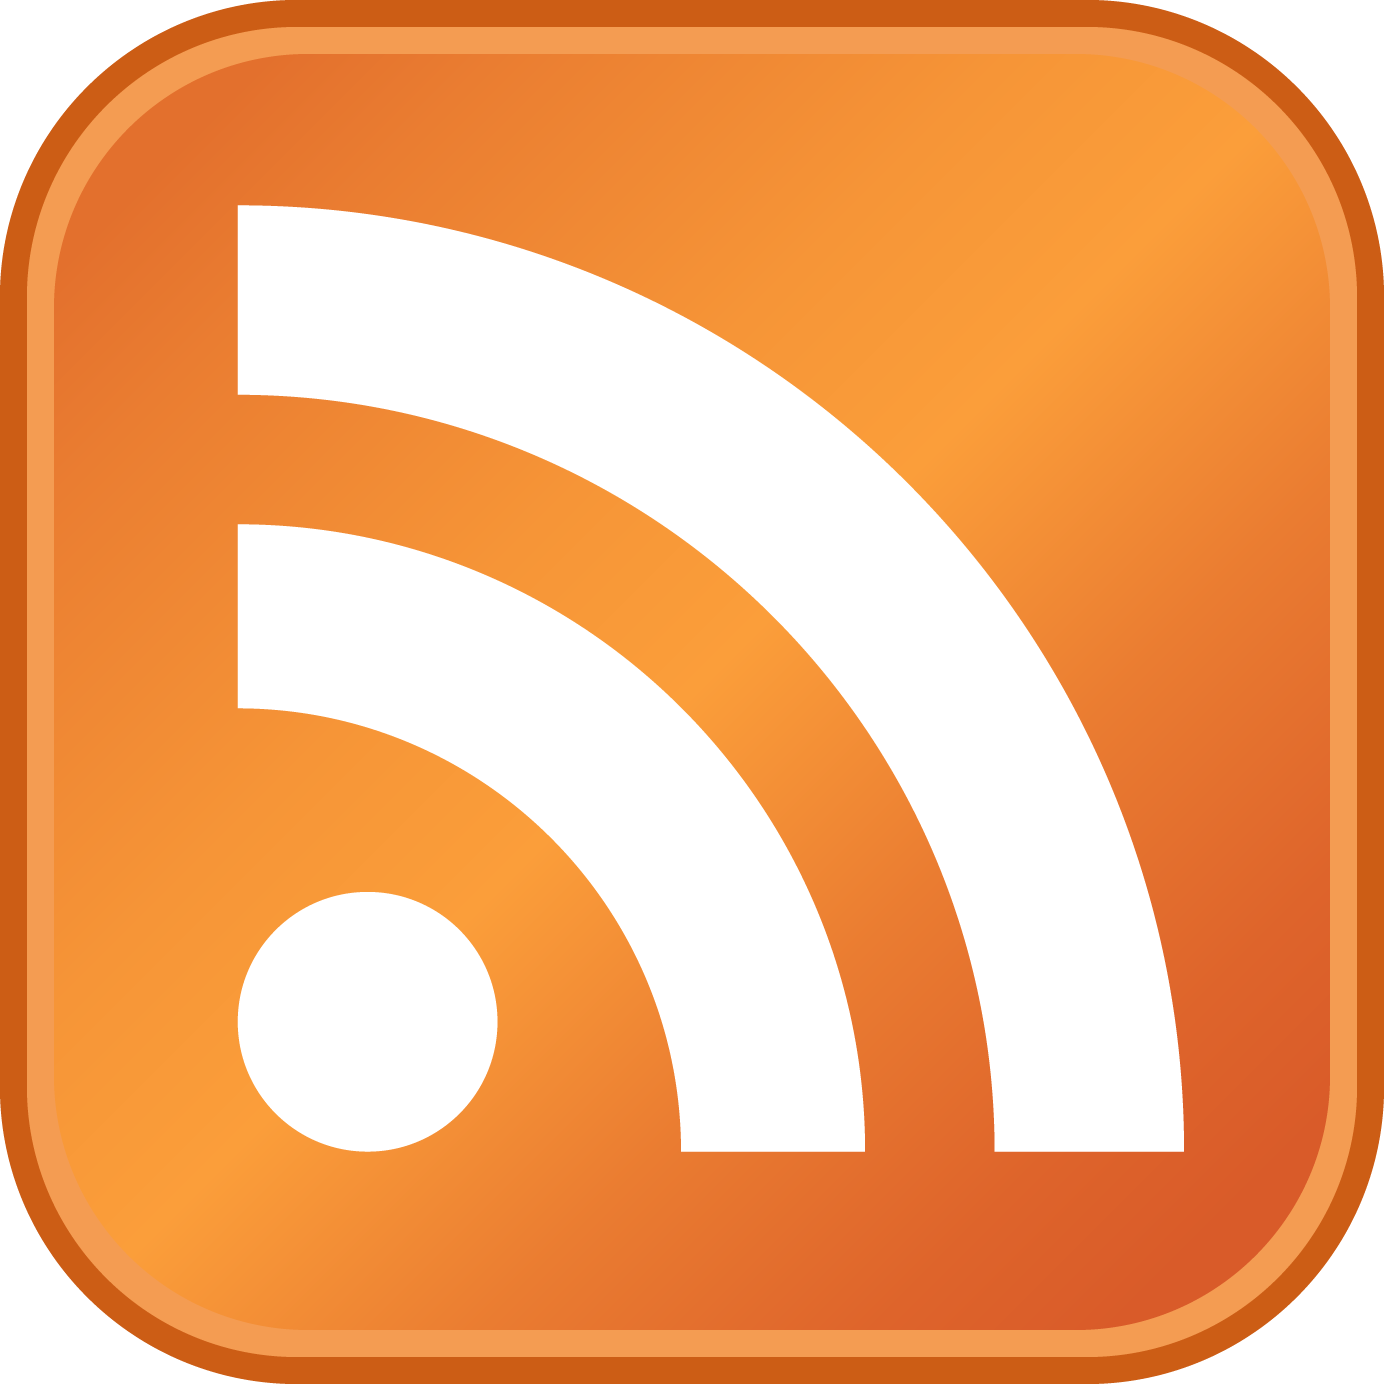 RSS Logo (Really Simple Syndication) png